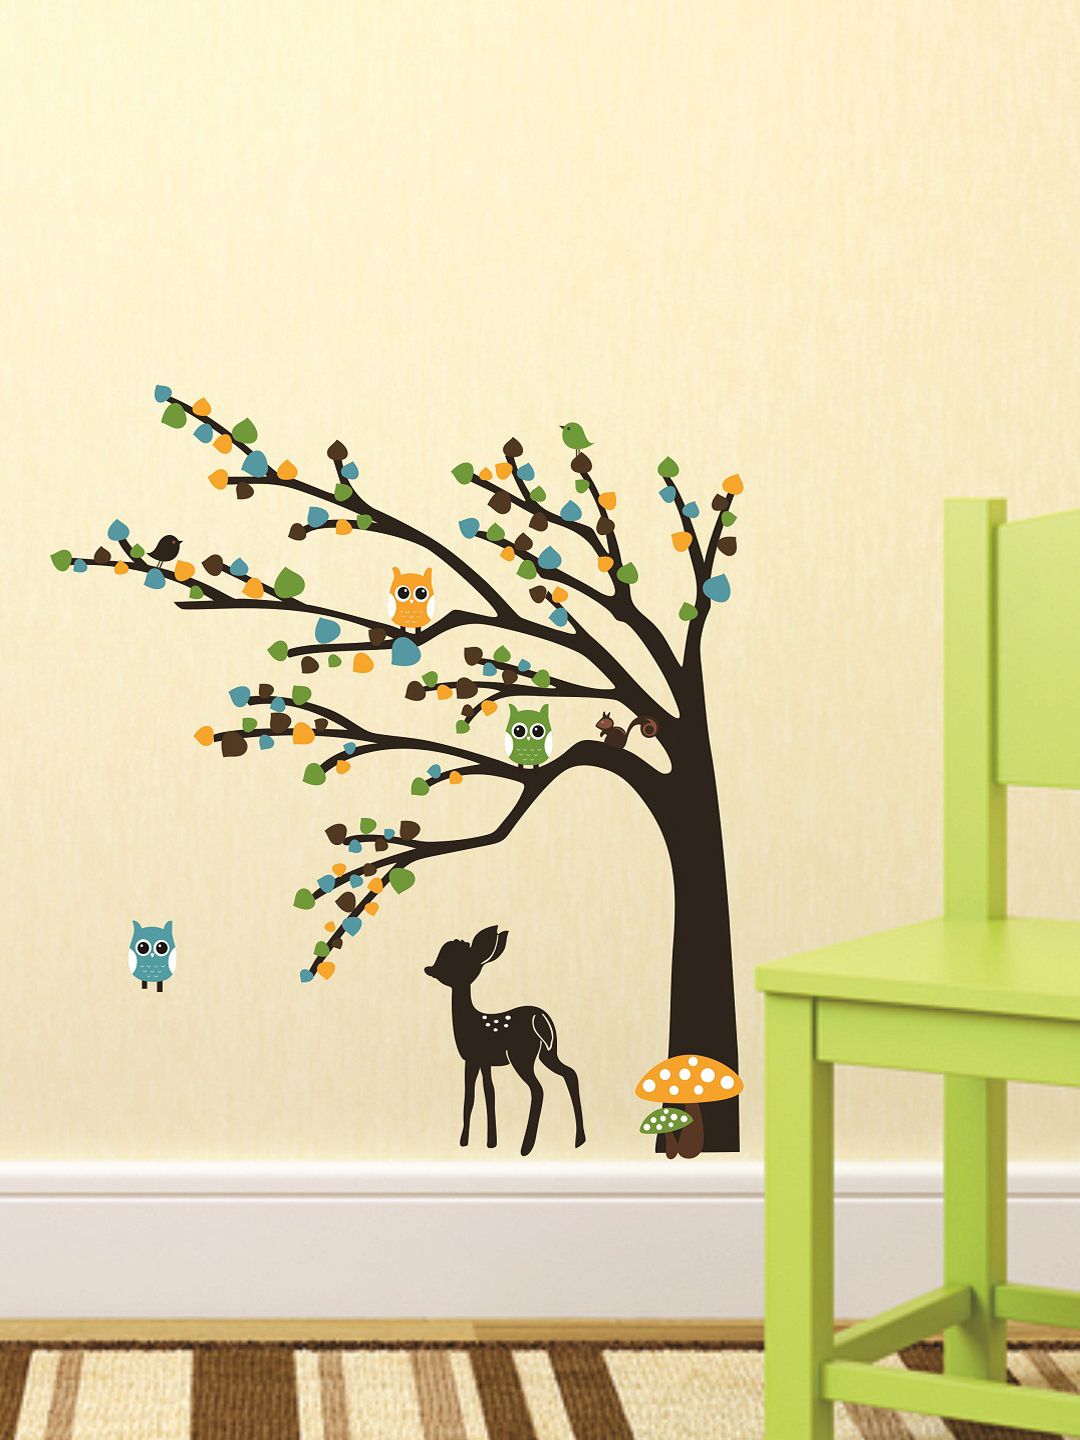 WALLSTICK Brown & Green Large Vinyl Wall Sticker Price in India